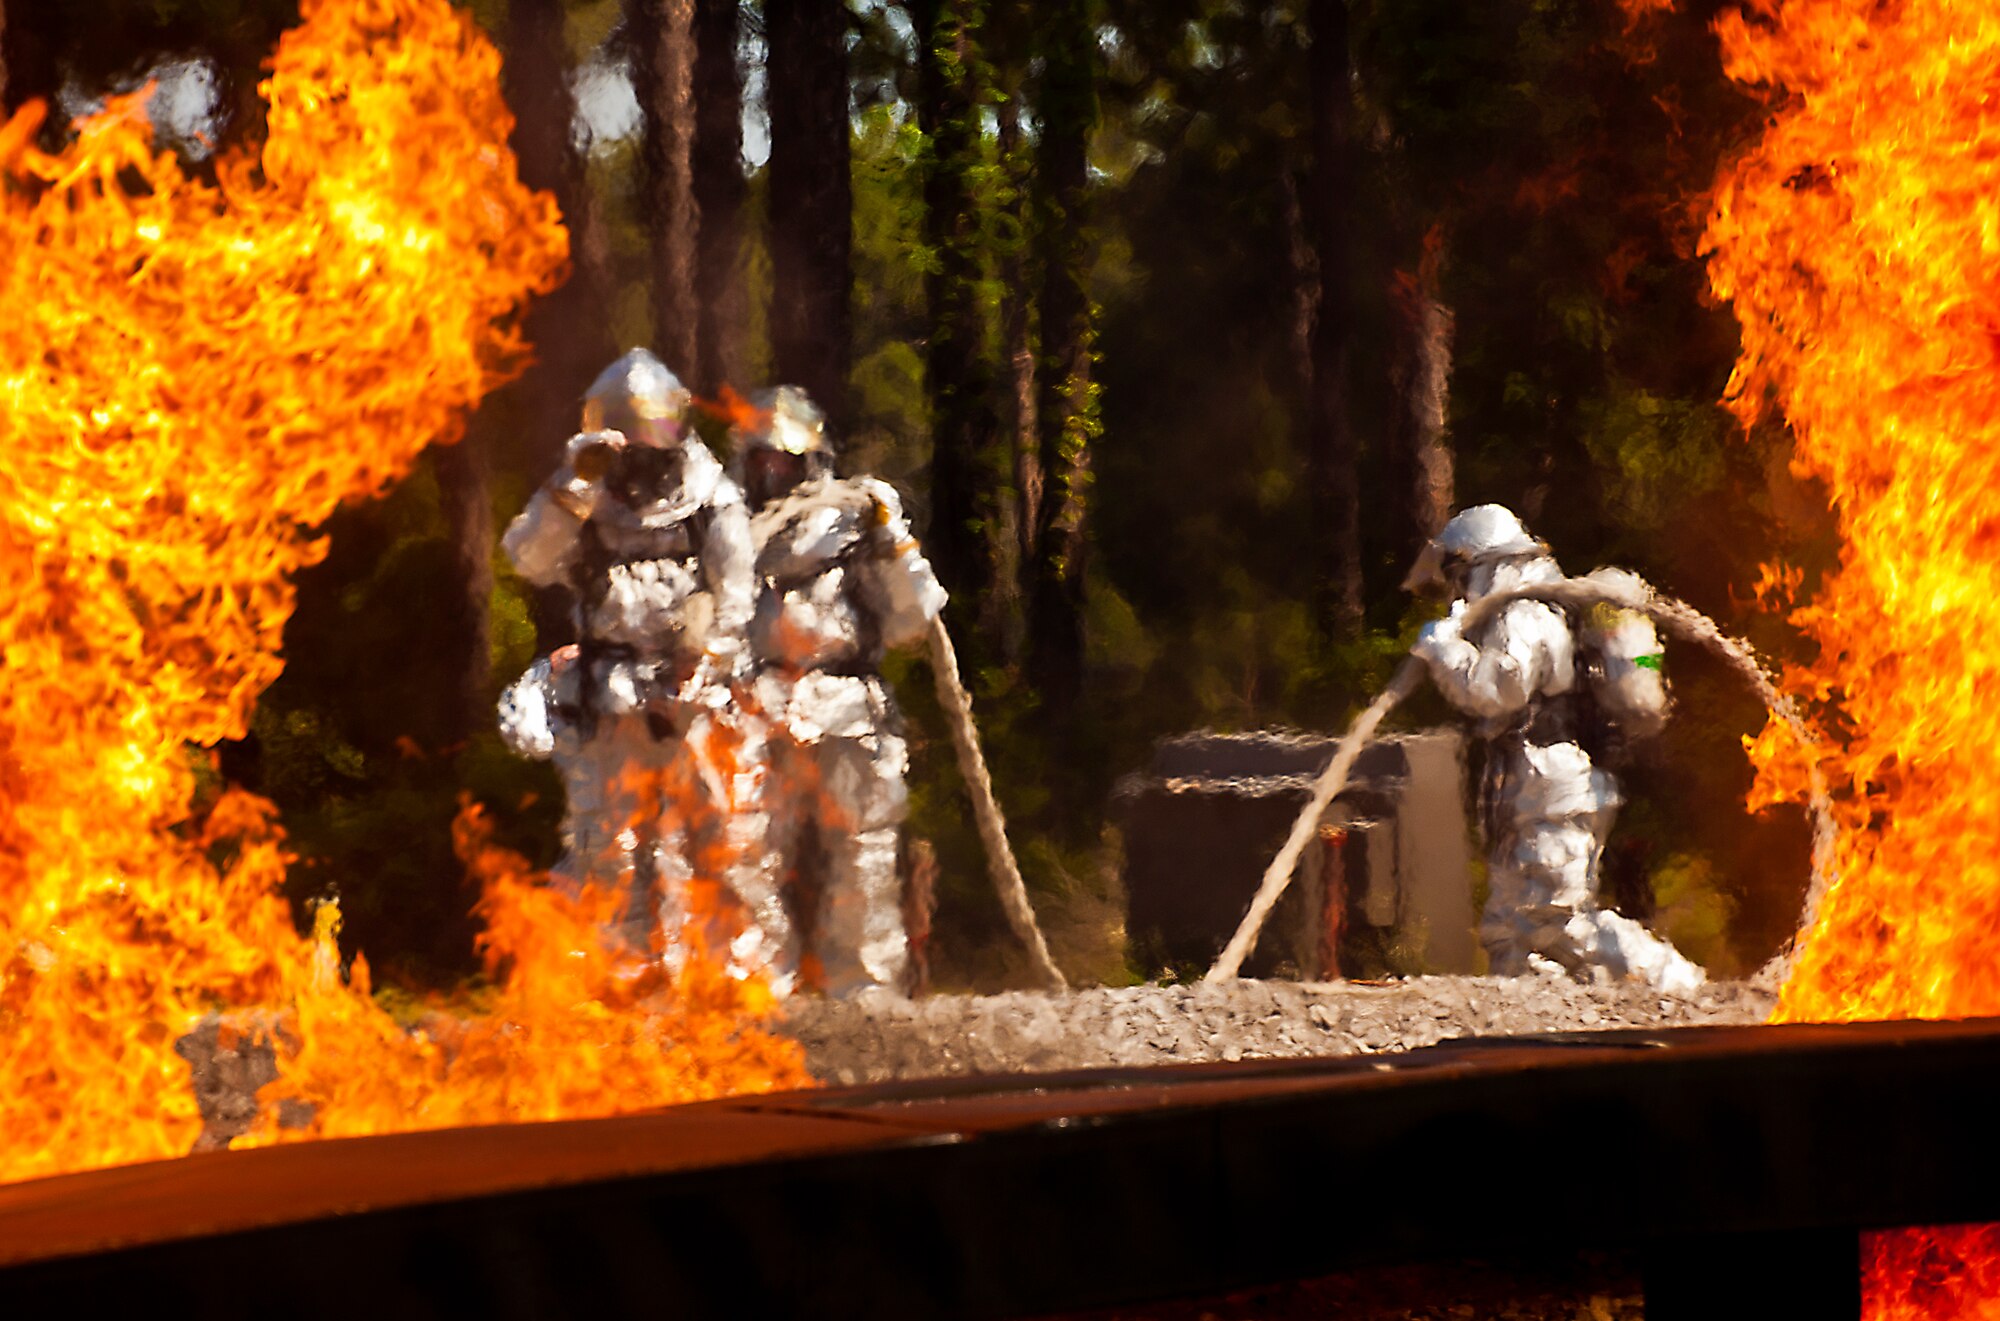 A team of firefighters from the 919th Special Operations Wing prepare to battle 10-foot high flame walls at an aircraft fire exercise and training at Hurlburt Field, Fla., April 13.  More than 10 of Duke Field’s firemen braved the flames of the aircraft burn pit for this annual refresher training.  (U.S. Air Force photo/Tech. Sgt. Samuel King Jr.)